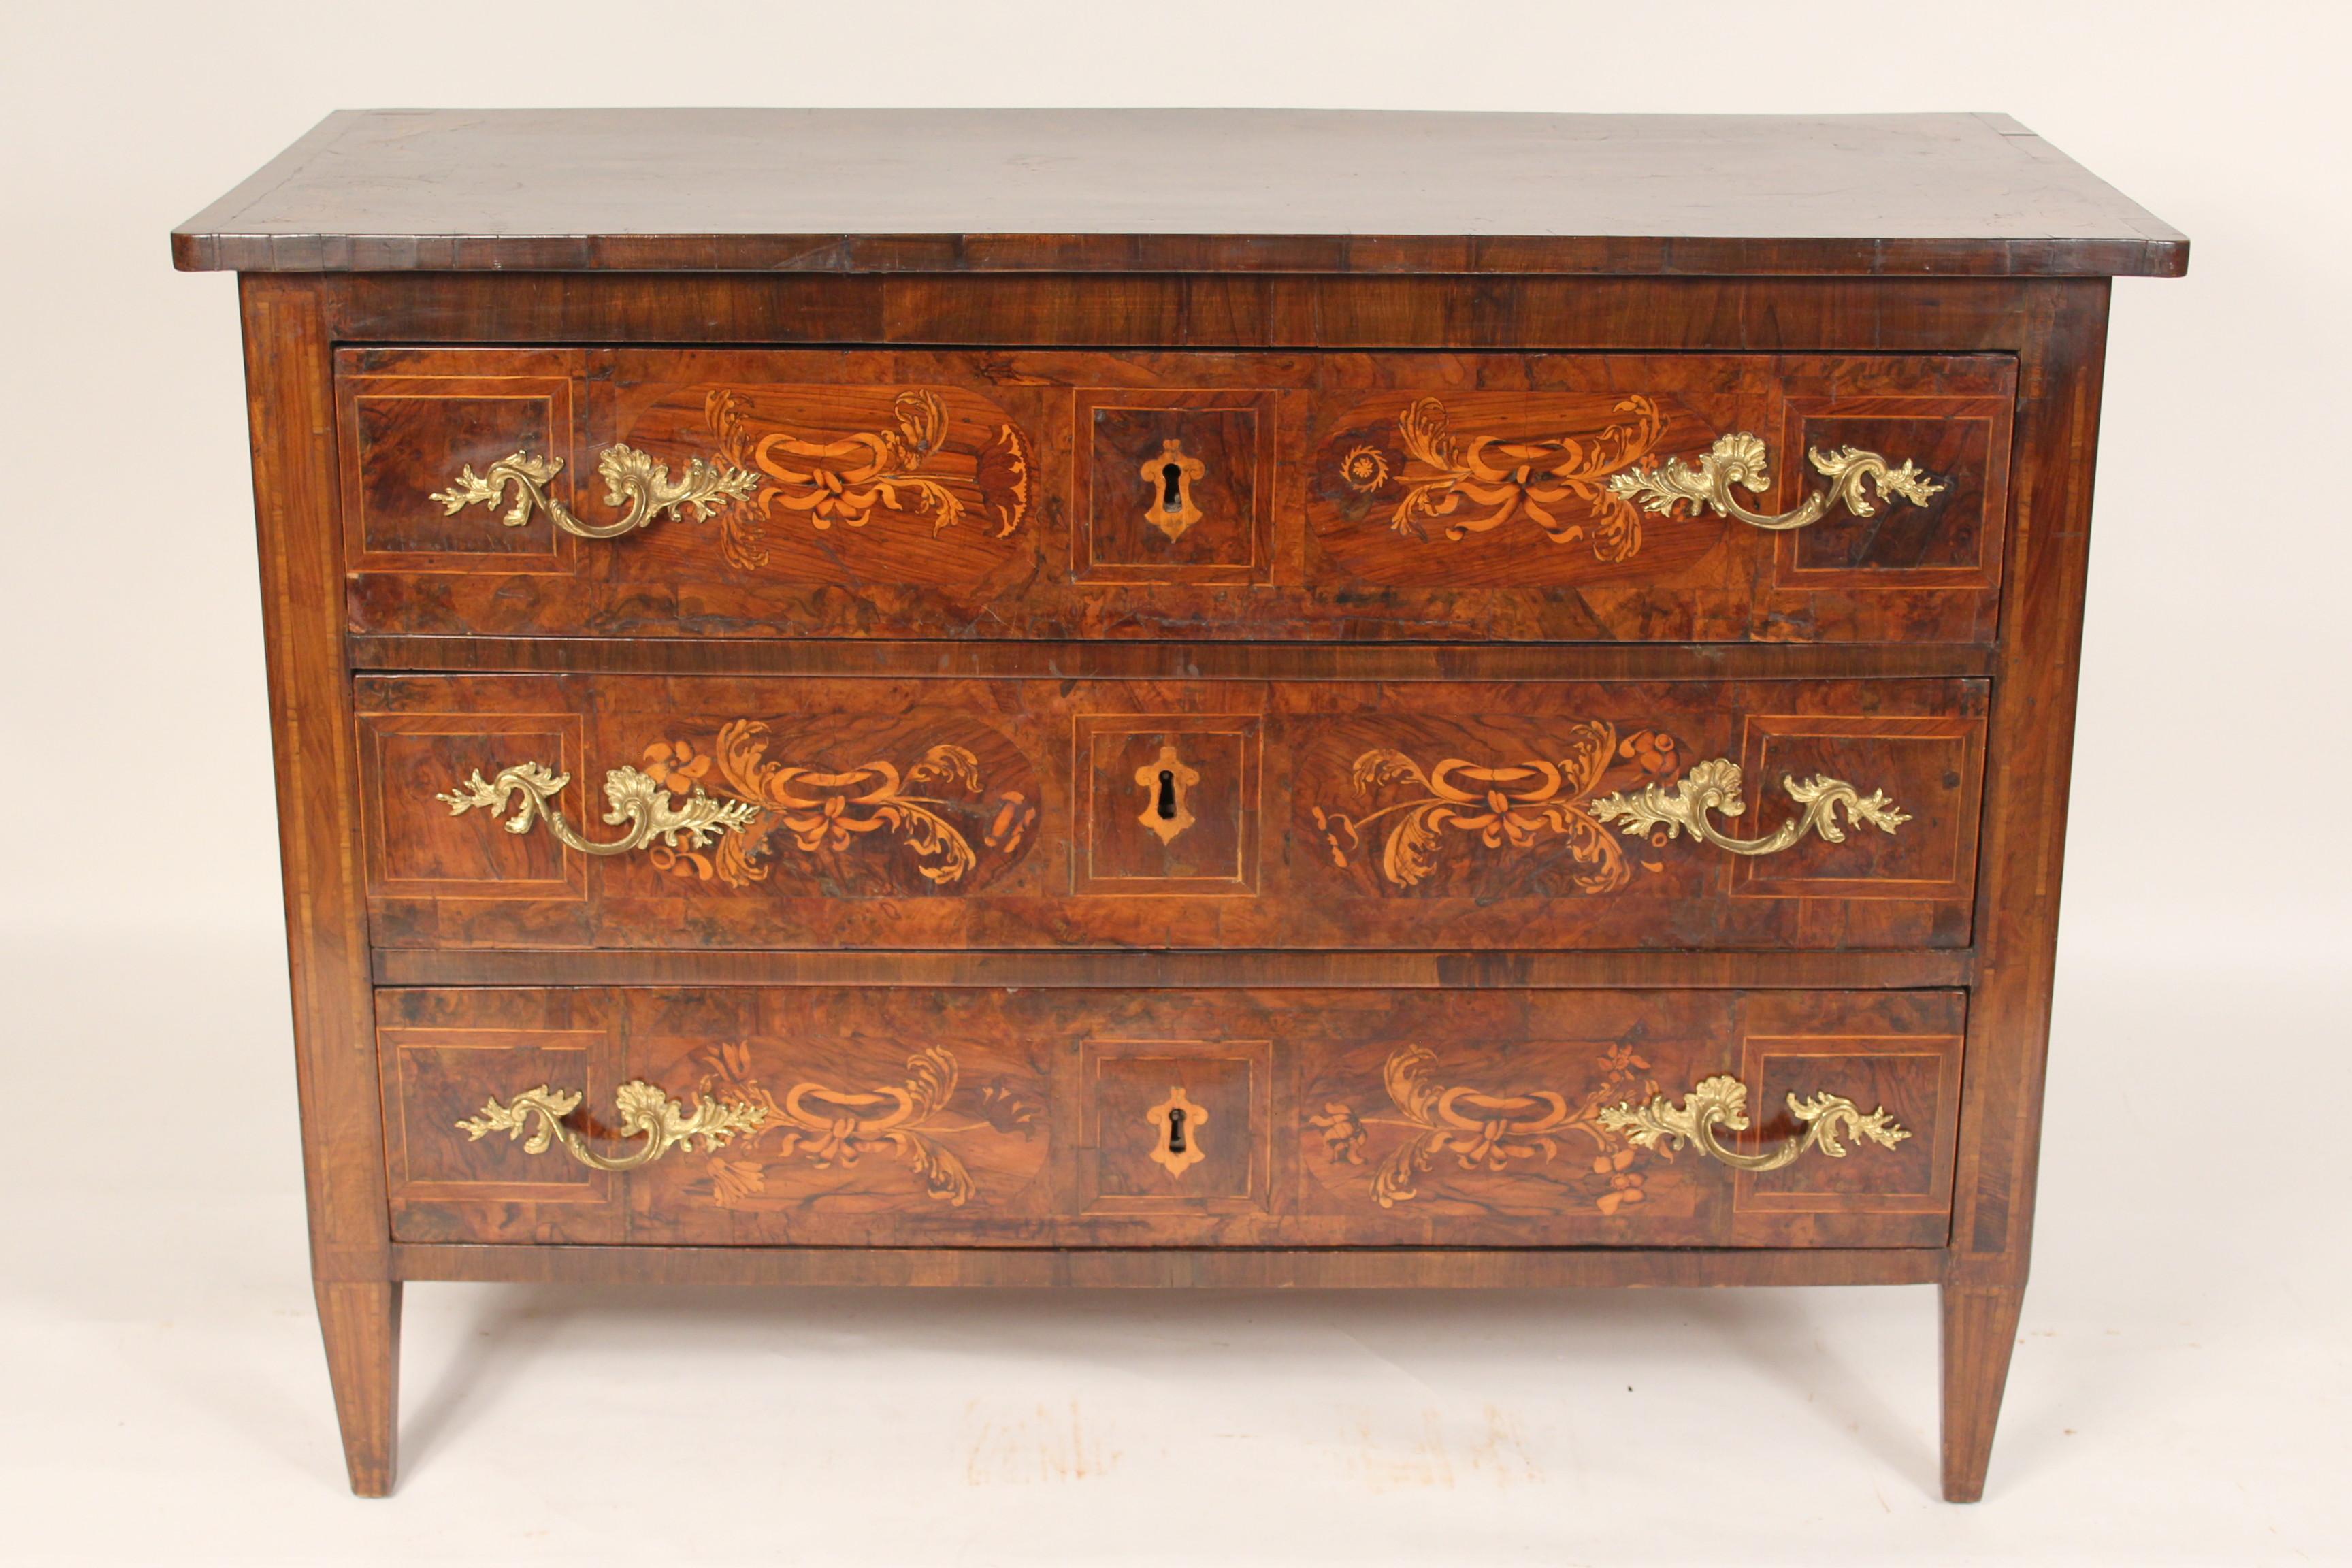 Continental antique Louis XVI style floral inlaid walnut chest of drawers with brass hardware, 19th century.